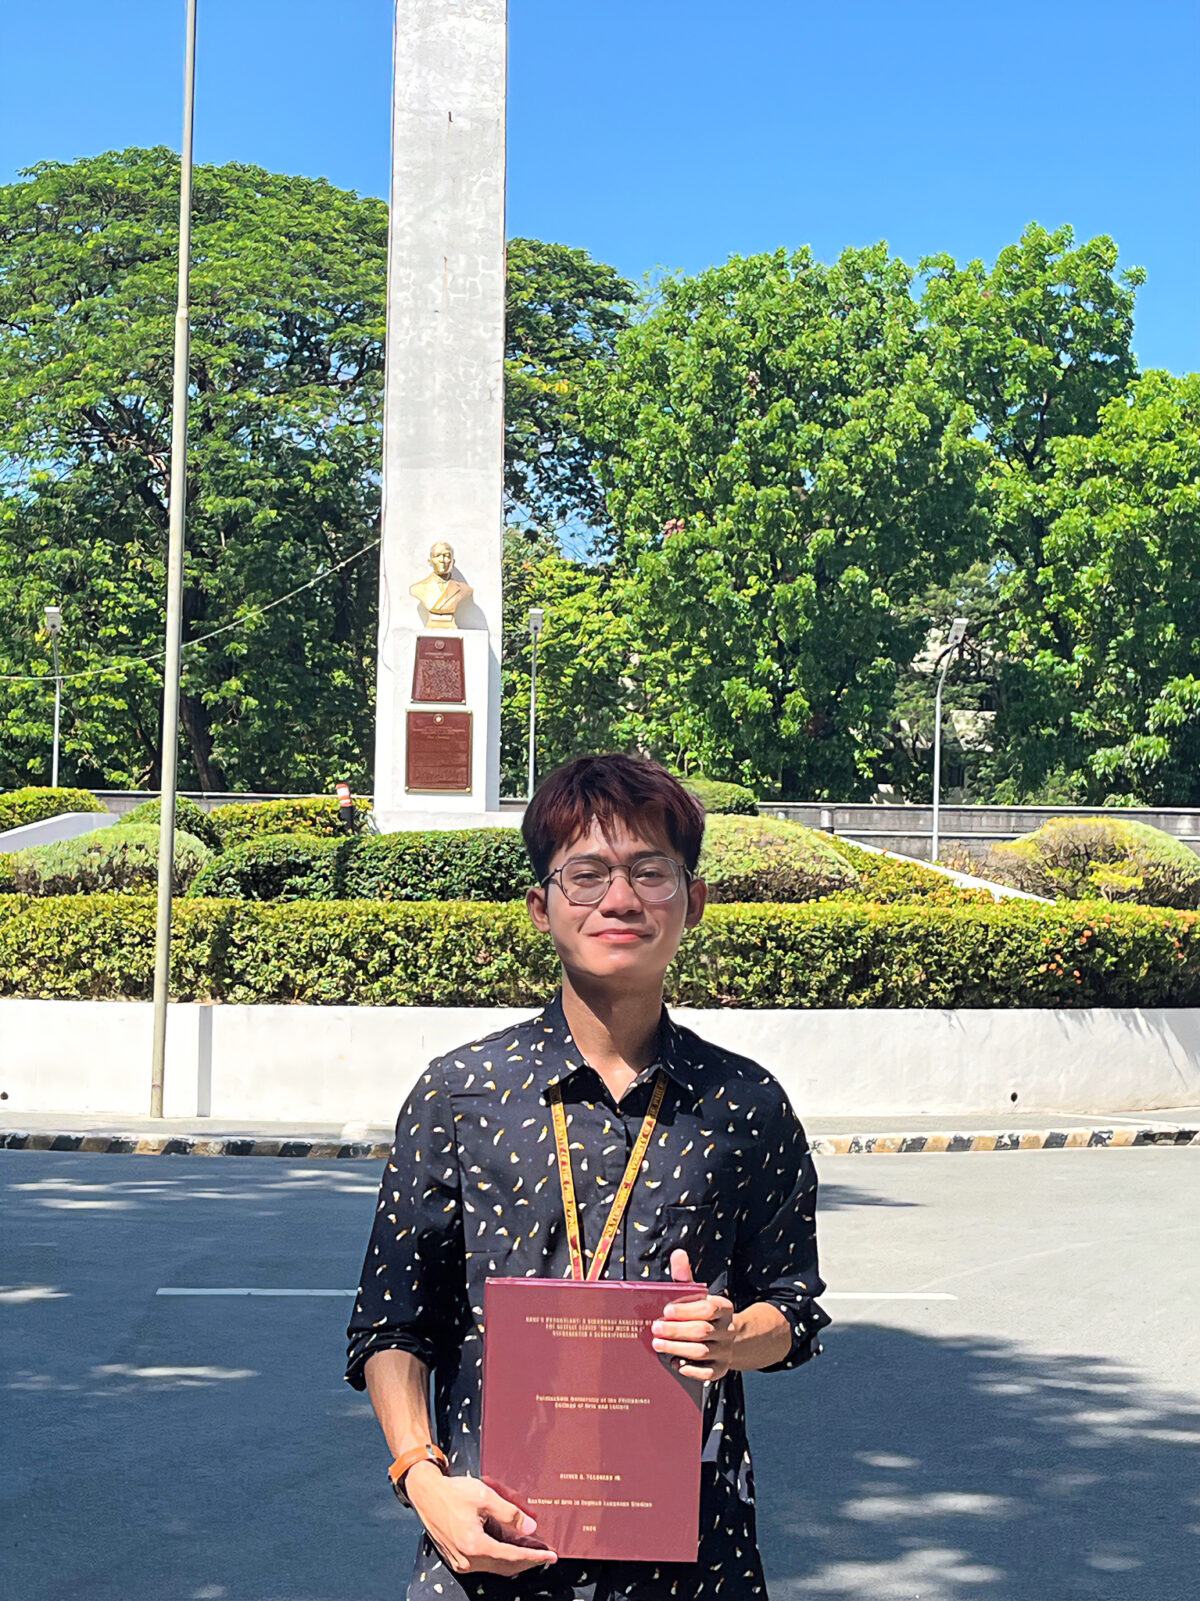 Oliver Tesorero holding the hardbound copy of his thesis at The Obelisk in PUP. Photo courtesy of Oliver Tesorero